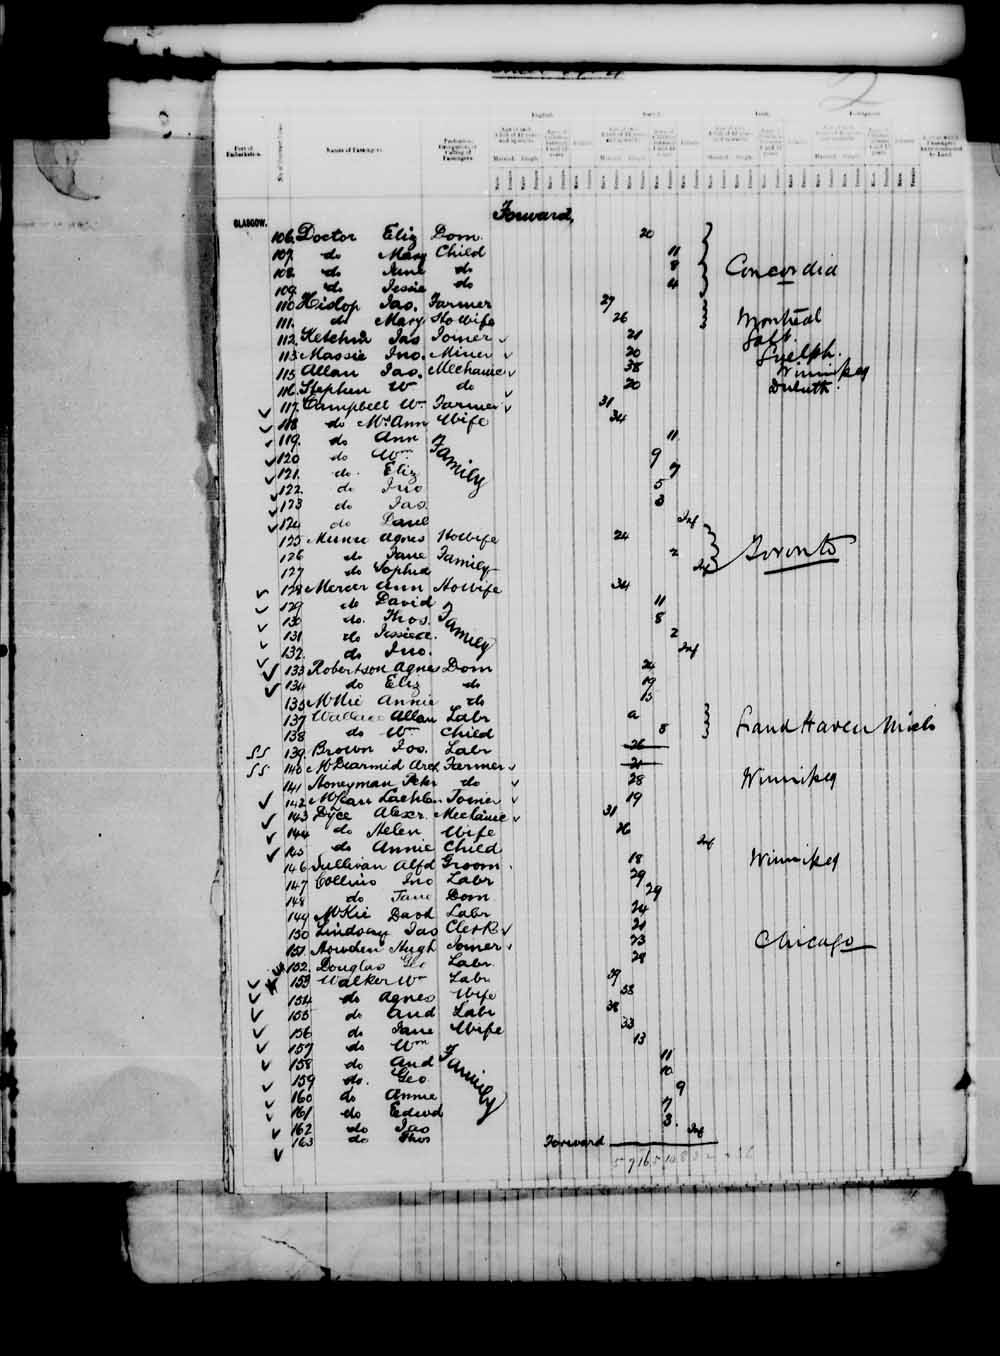 Digitized page of Passenger Lists for Image No.: e003542664